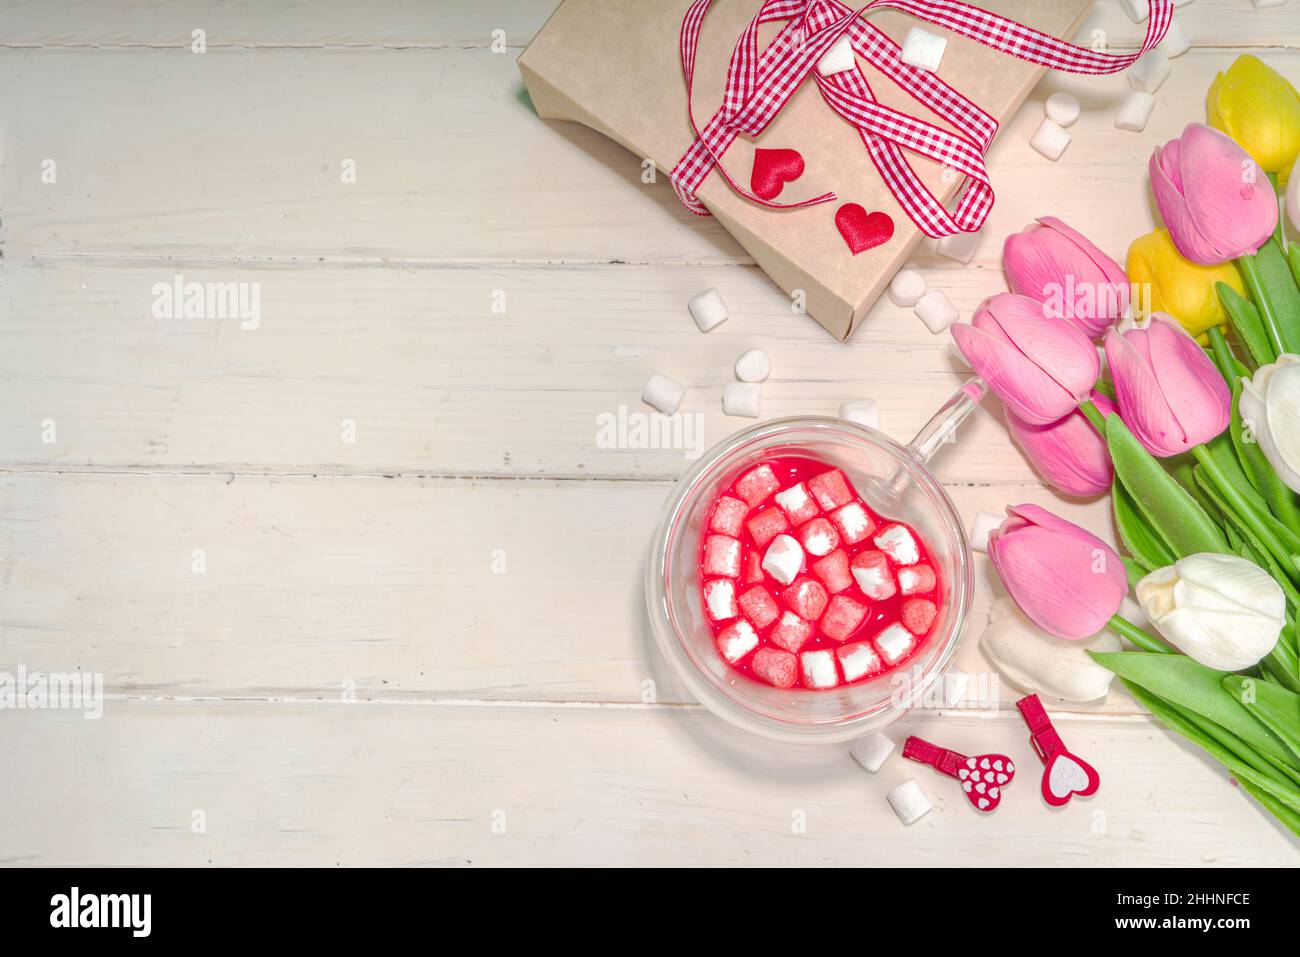 Heart shaped cup with red velvet hot chocolate, with small marshmallows, gift box and flowers for Valentine's day Stock Photo